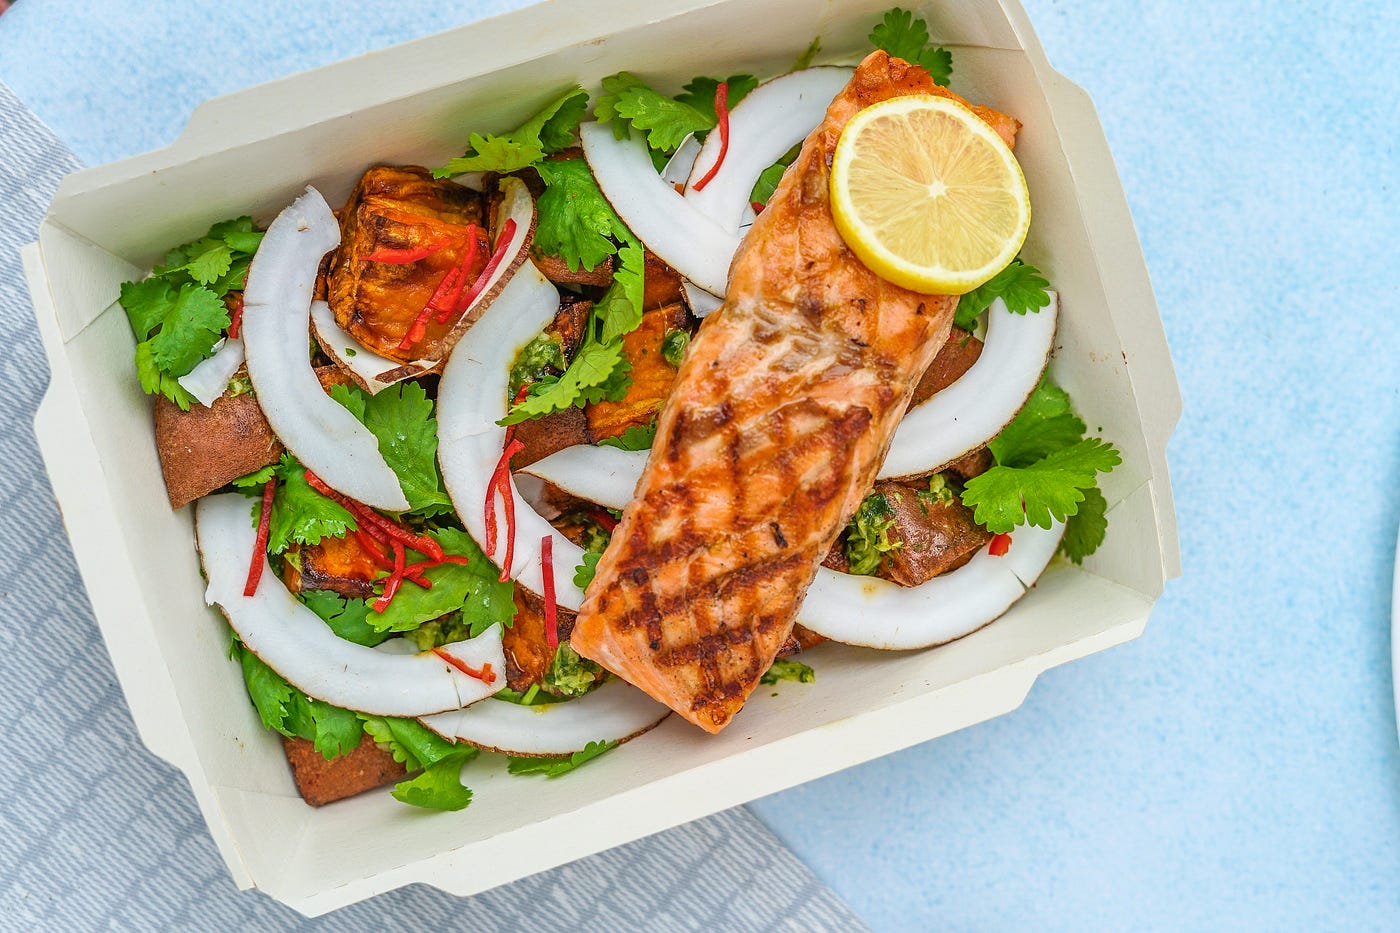 A plate of healthy food, including a strip of salmon with a lemon atop it. The salmon strip perches on a bed of lettuce and other vegetables.